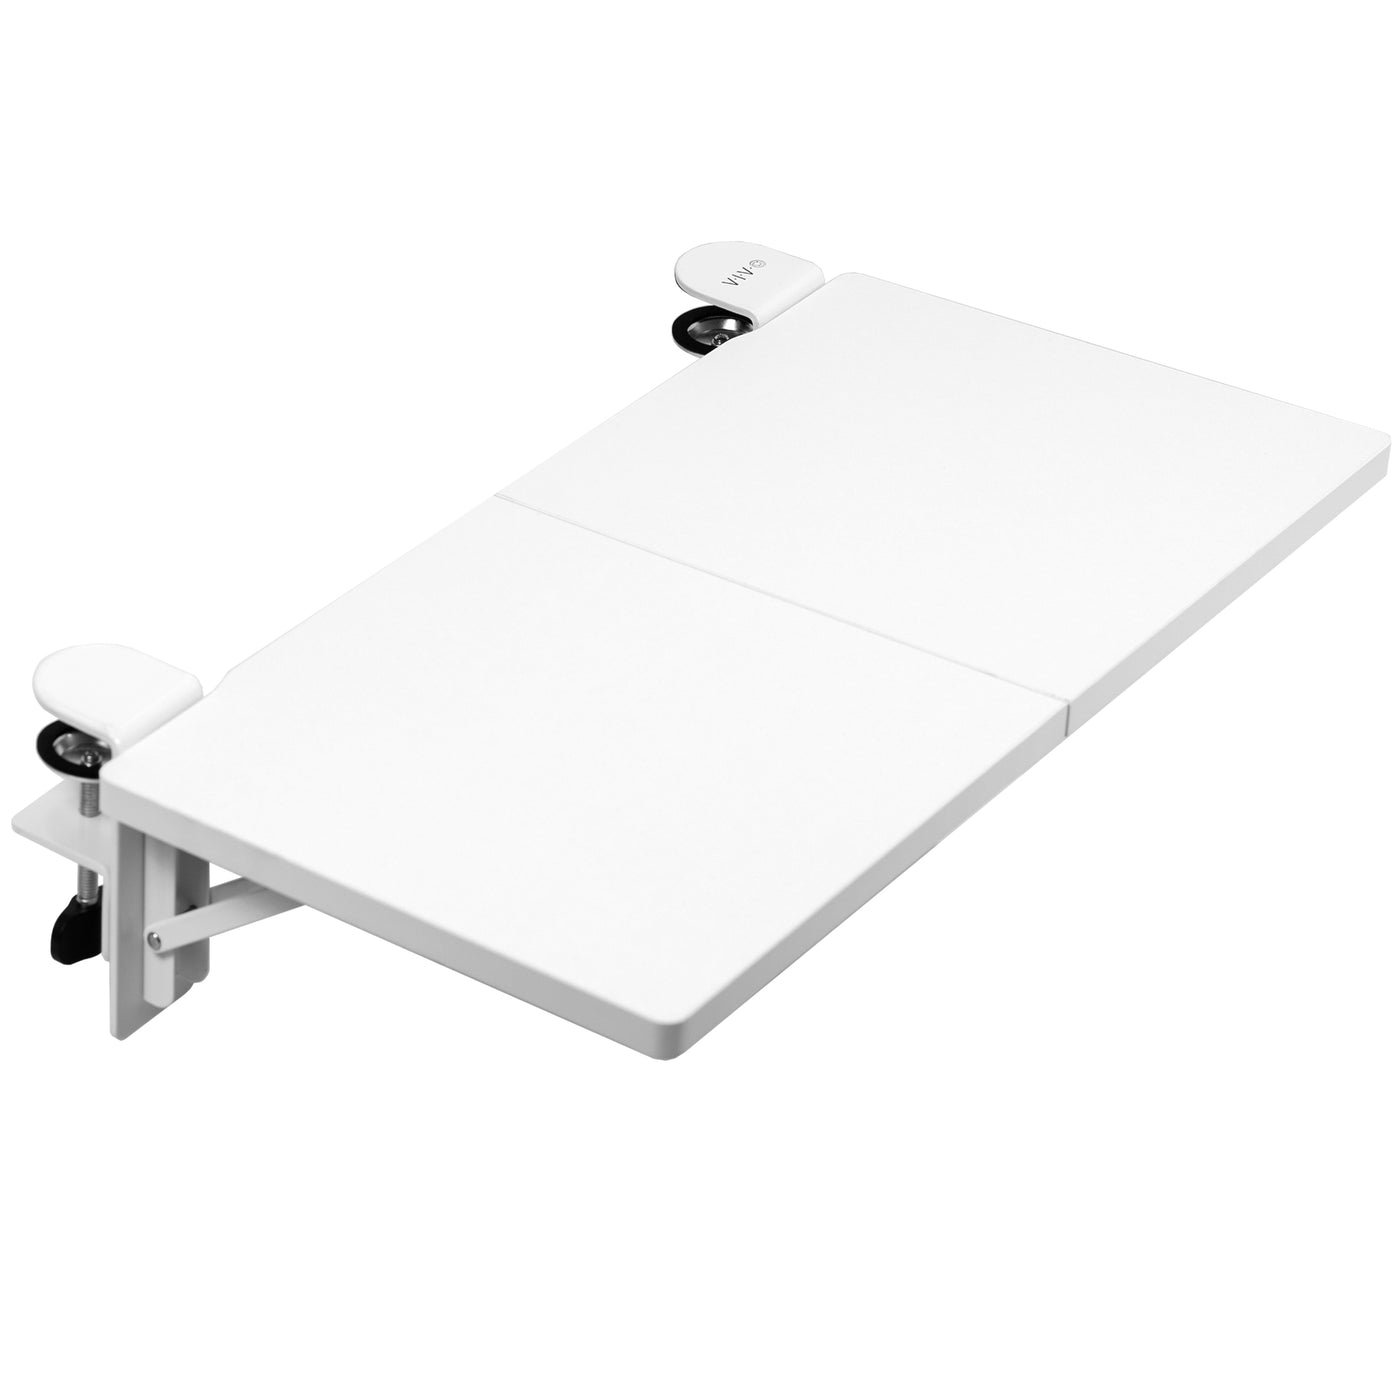 Clamp-on 24 x 12 inch (14 Including Clamps) Desk Extender, Foldable Keyboard Tray, Table Mount for Sit Stand Desks